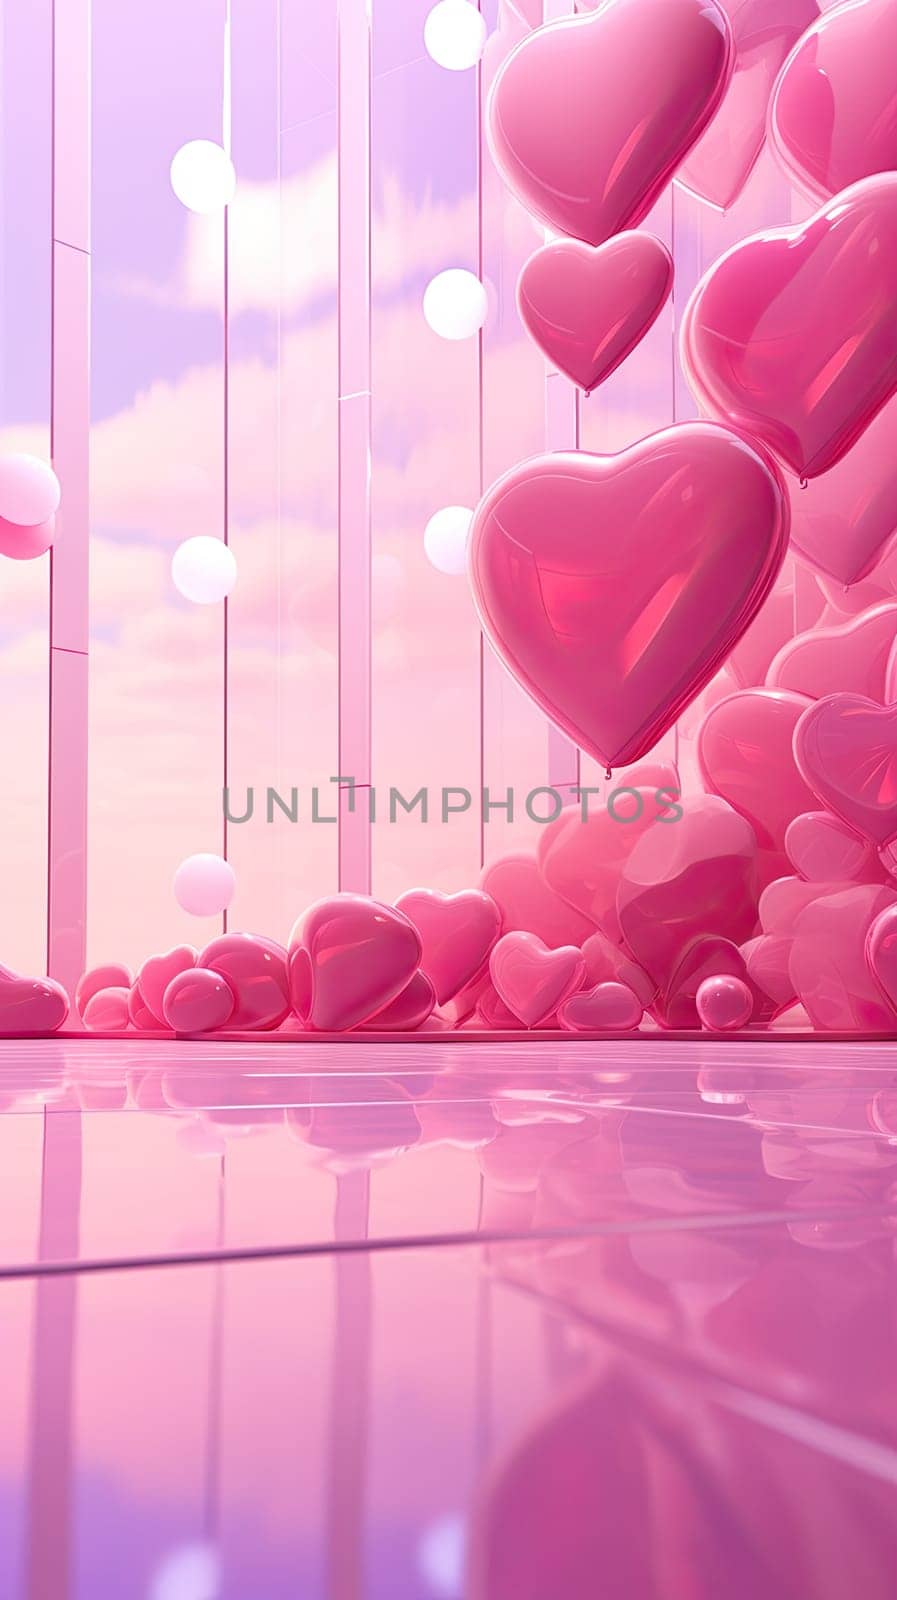 Abstract valentine vertical background illustration with pink hearts hanging indoors with copy space by papatonic